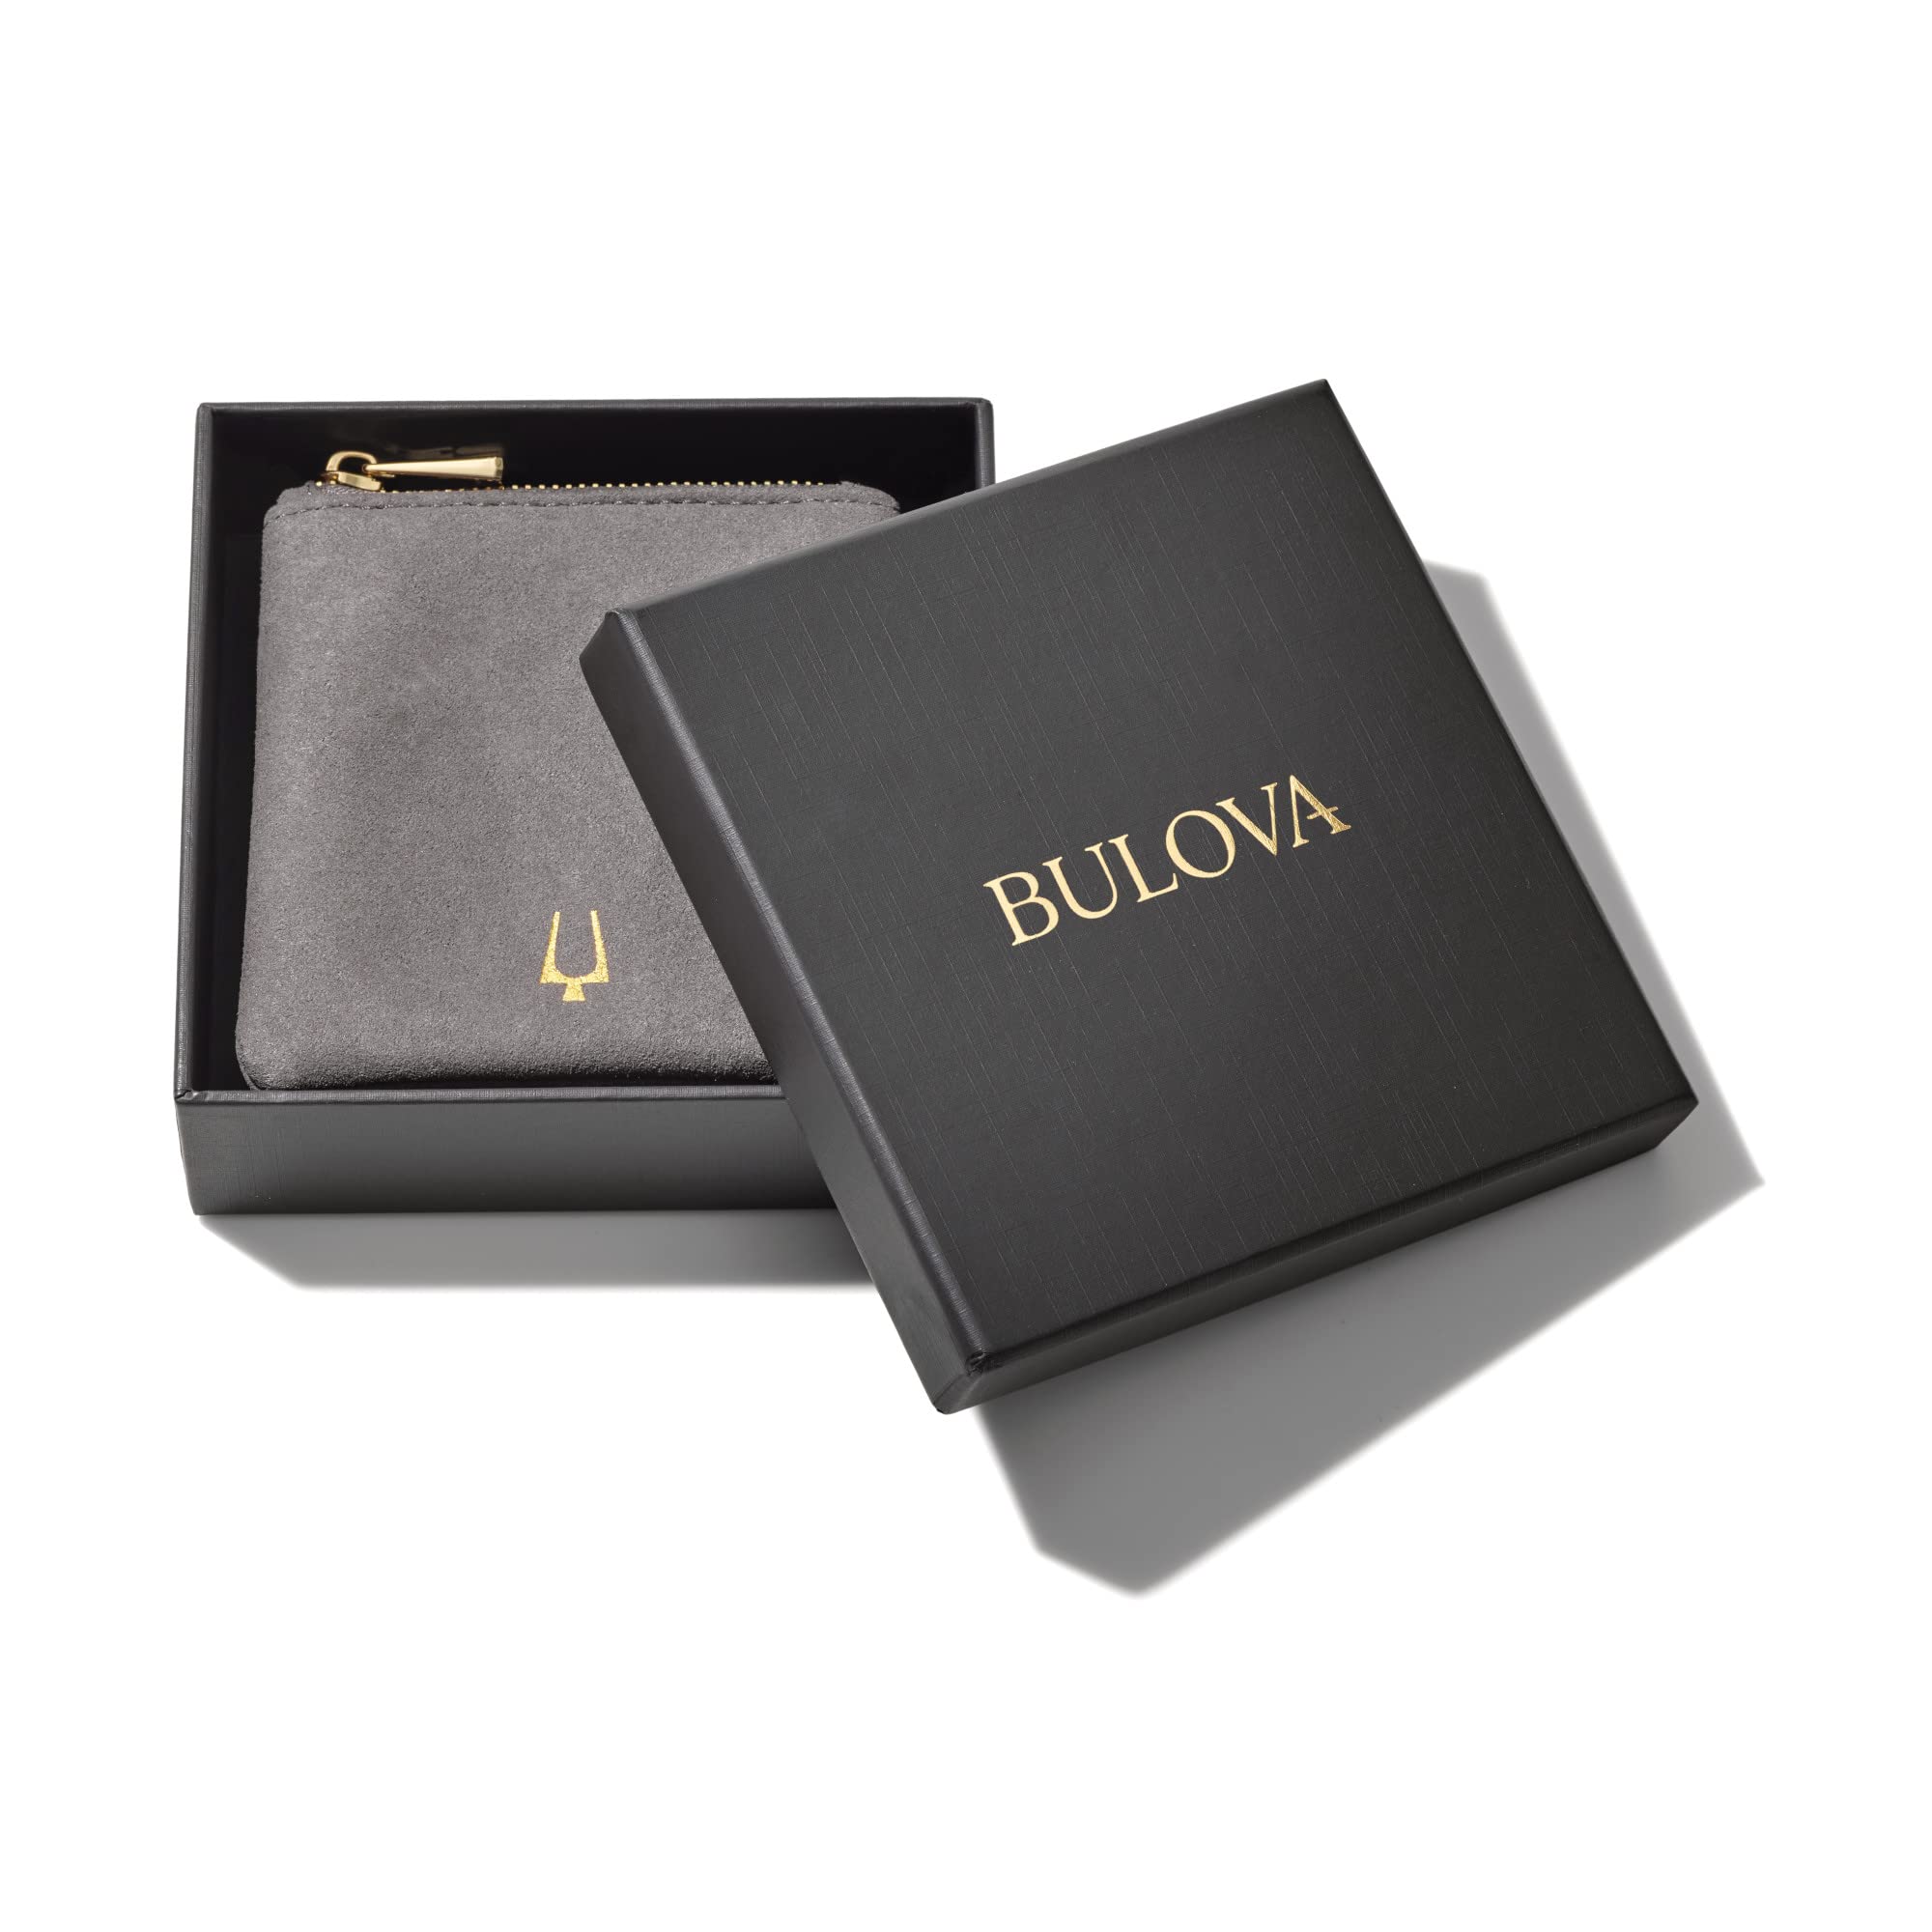 Bulova Jewelry Men's Precisionist Round Box Link Chain Necklace with Dog Tag Pendant Style